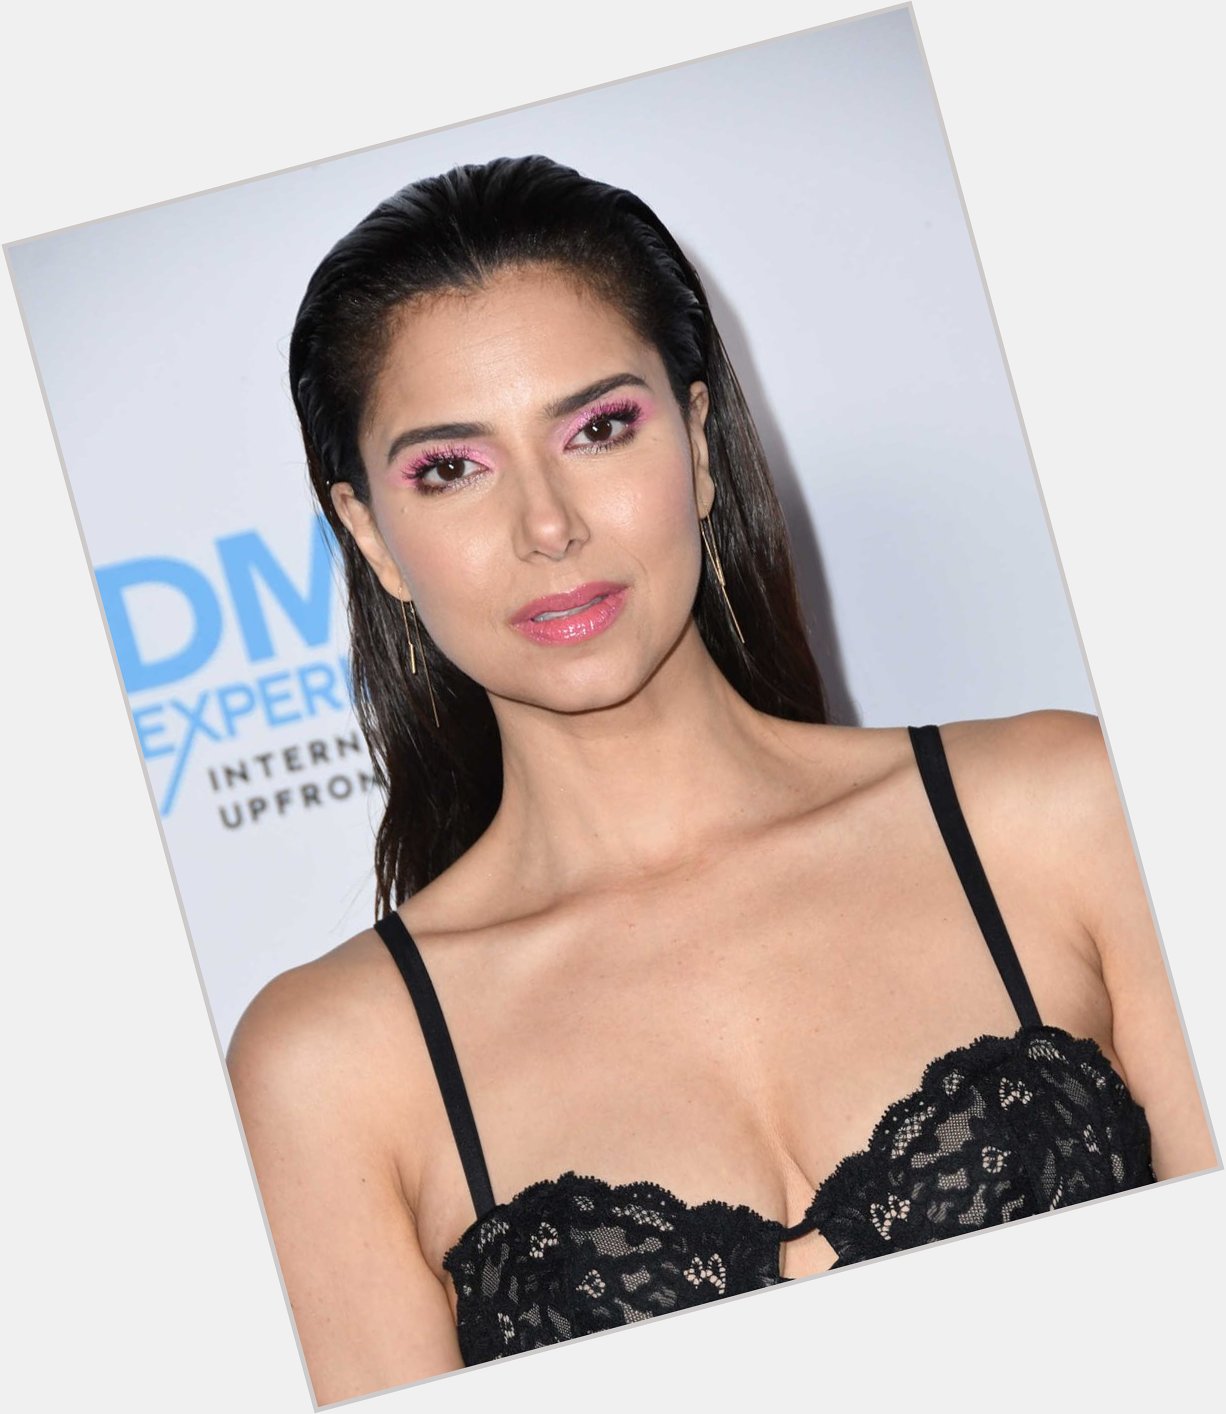 Happy 48th Birthday Shout Out to the lovely Roselyn Sanchez from Puerto Rico!! 